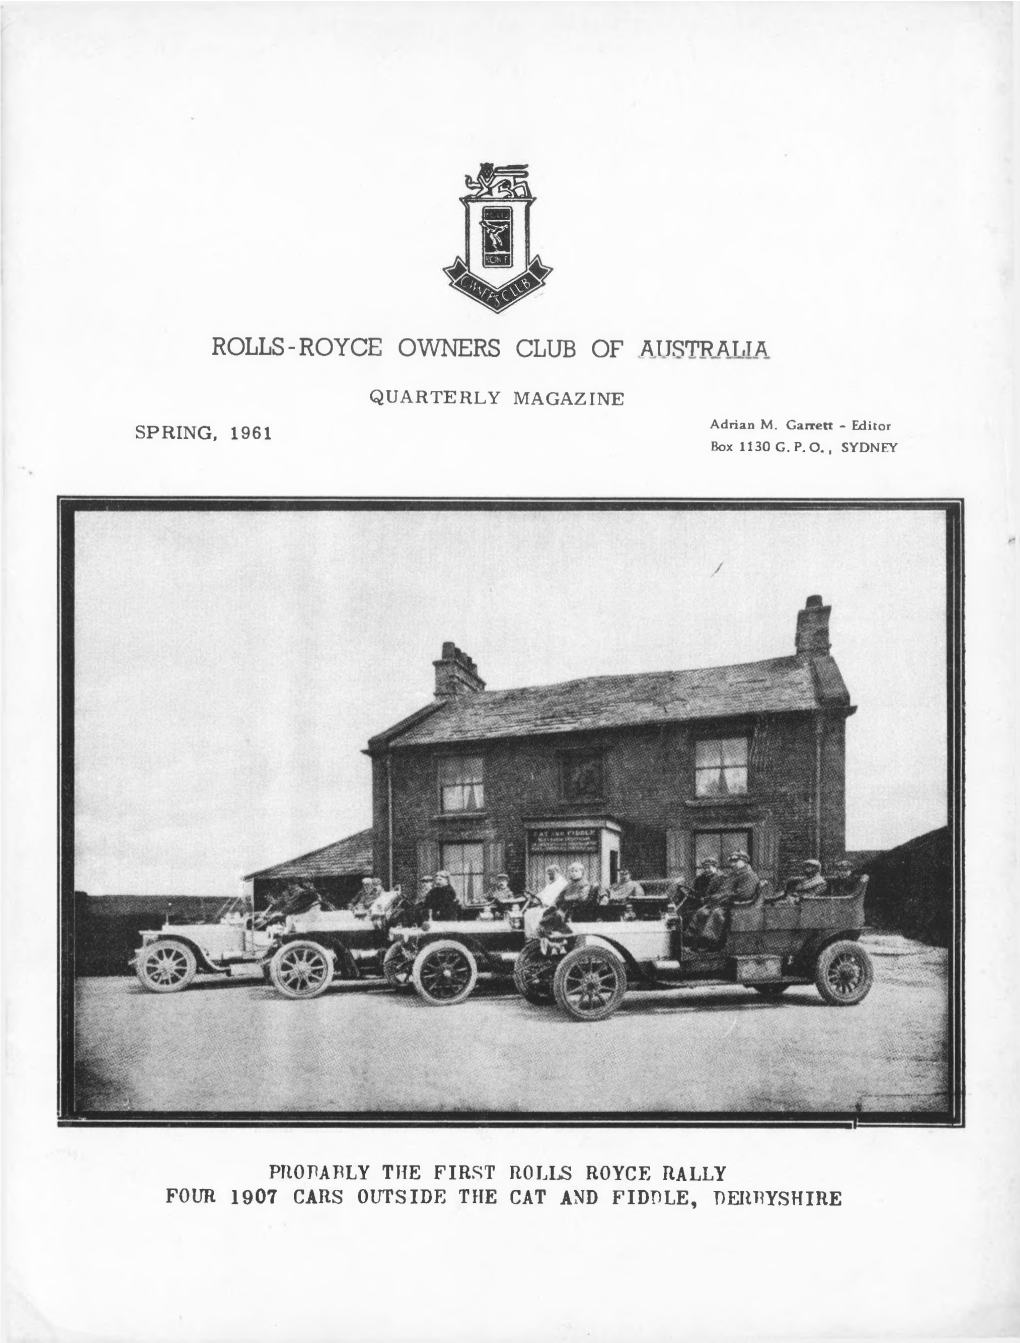 The Federal Journal of the Rolls-Royce Owners' Club of Australia